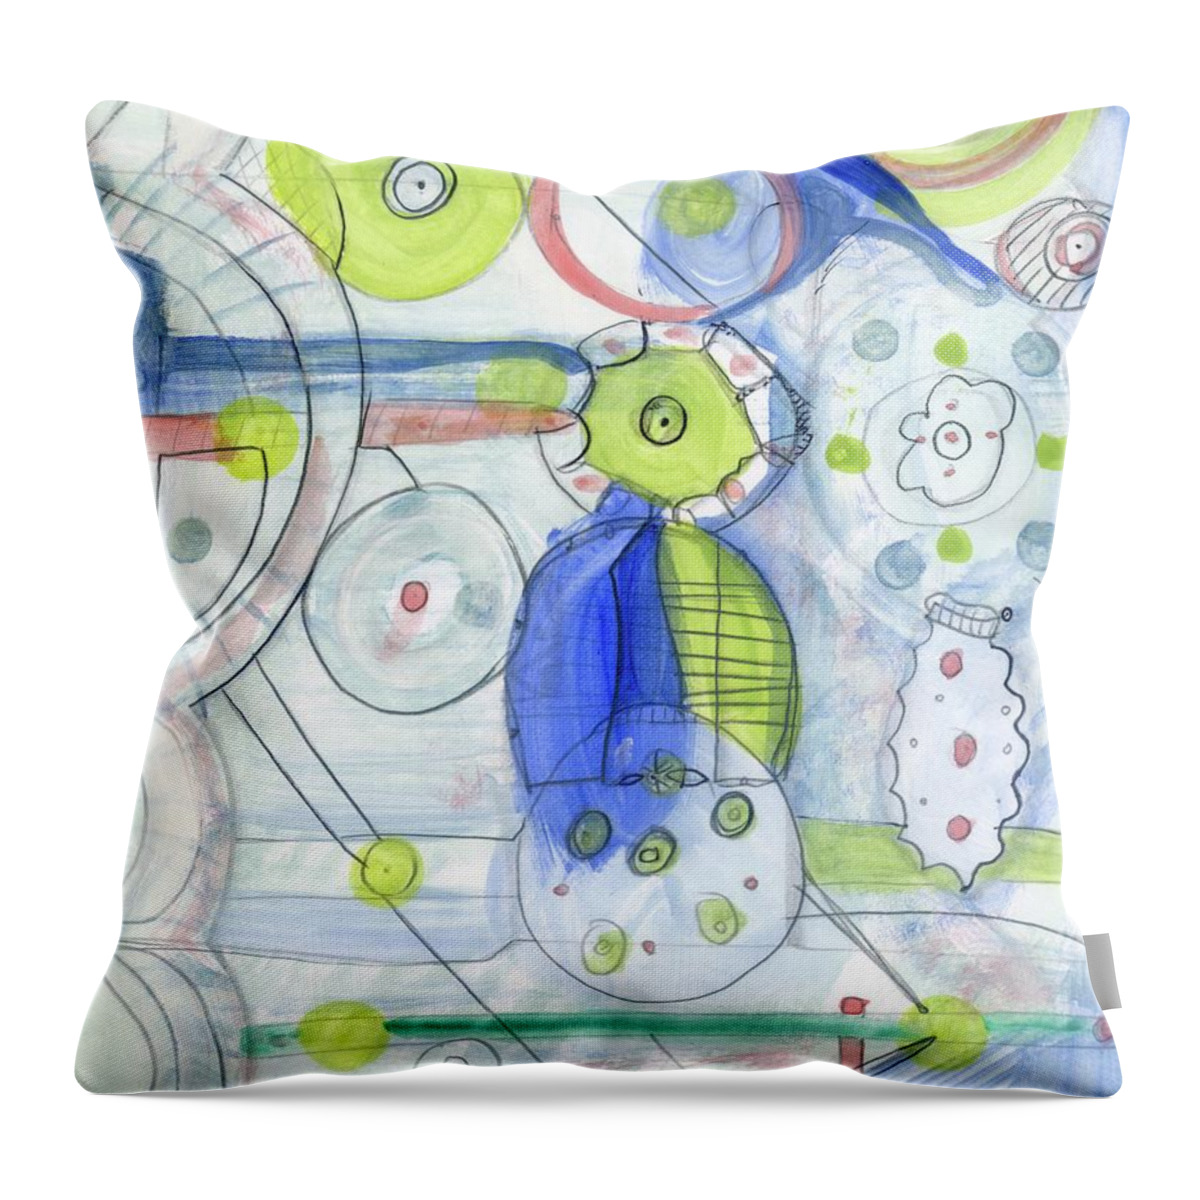 Modern Art Paintings Throw Pillow featuring the painting It's A Process by Stephen Lucas